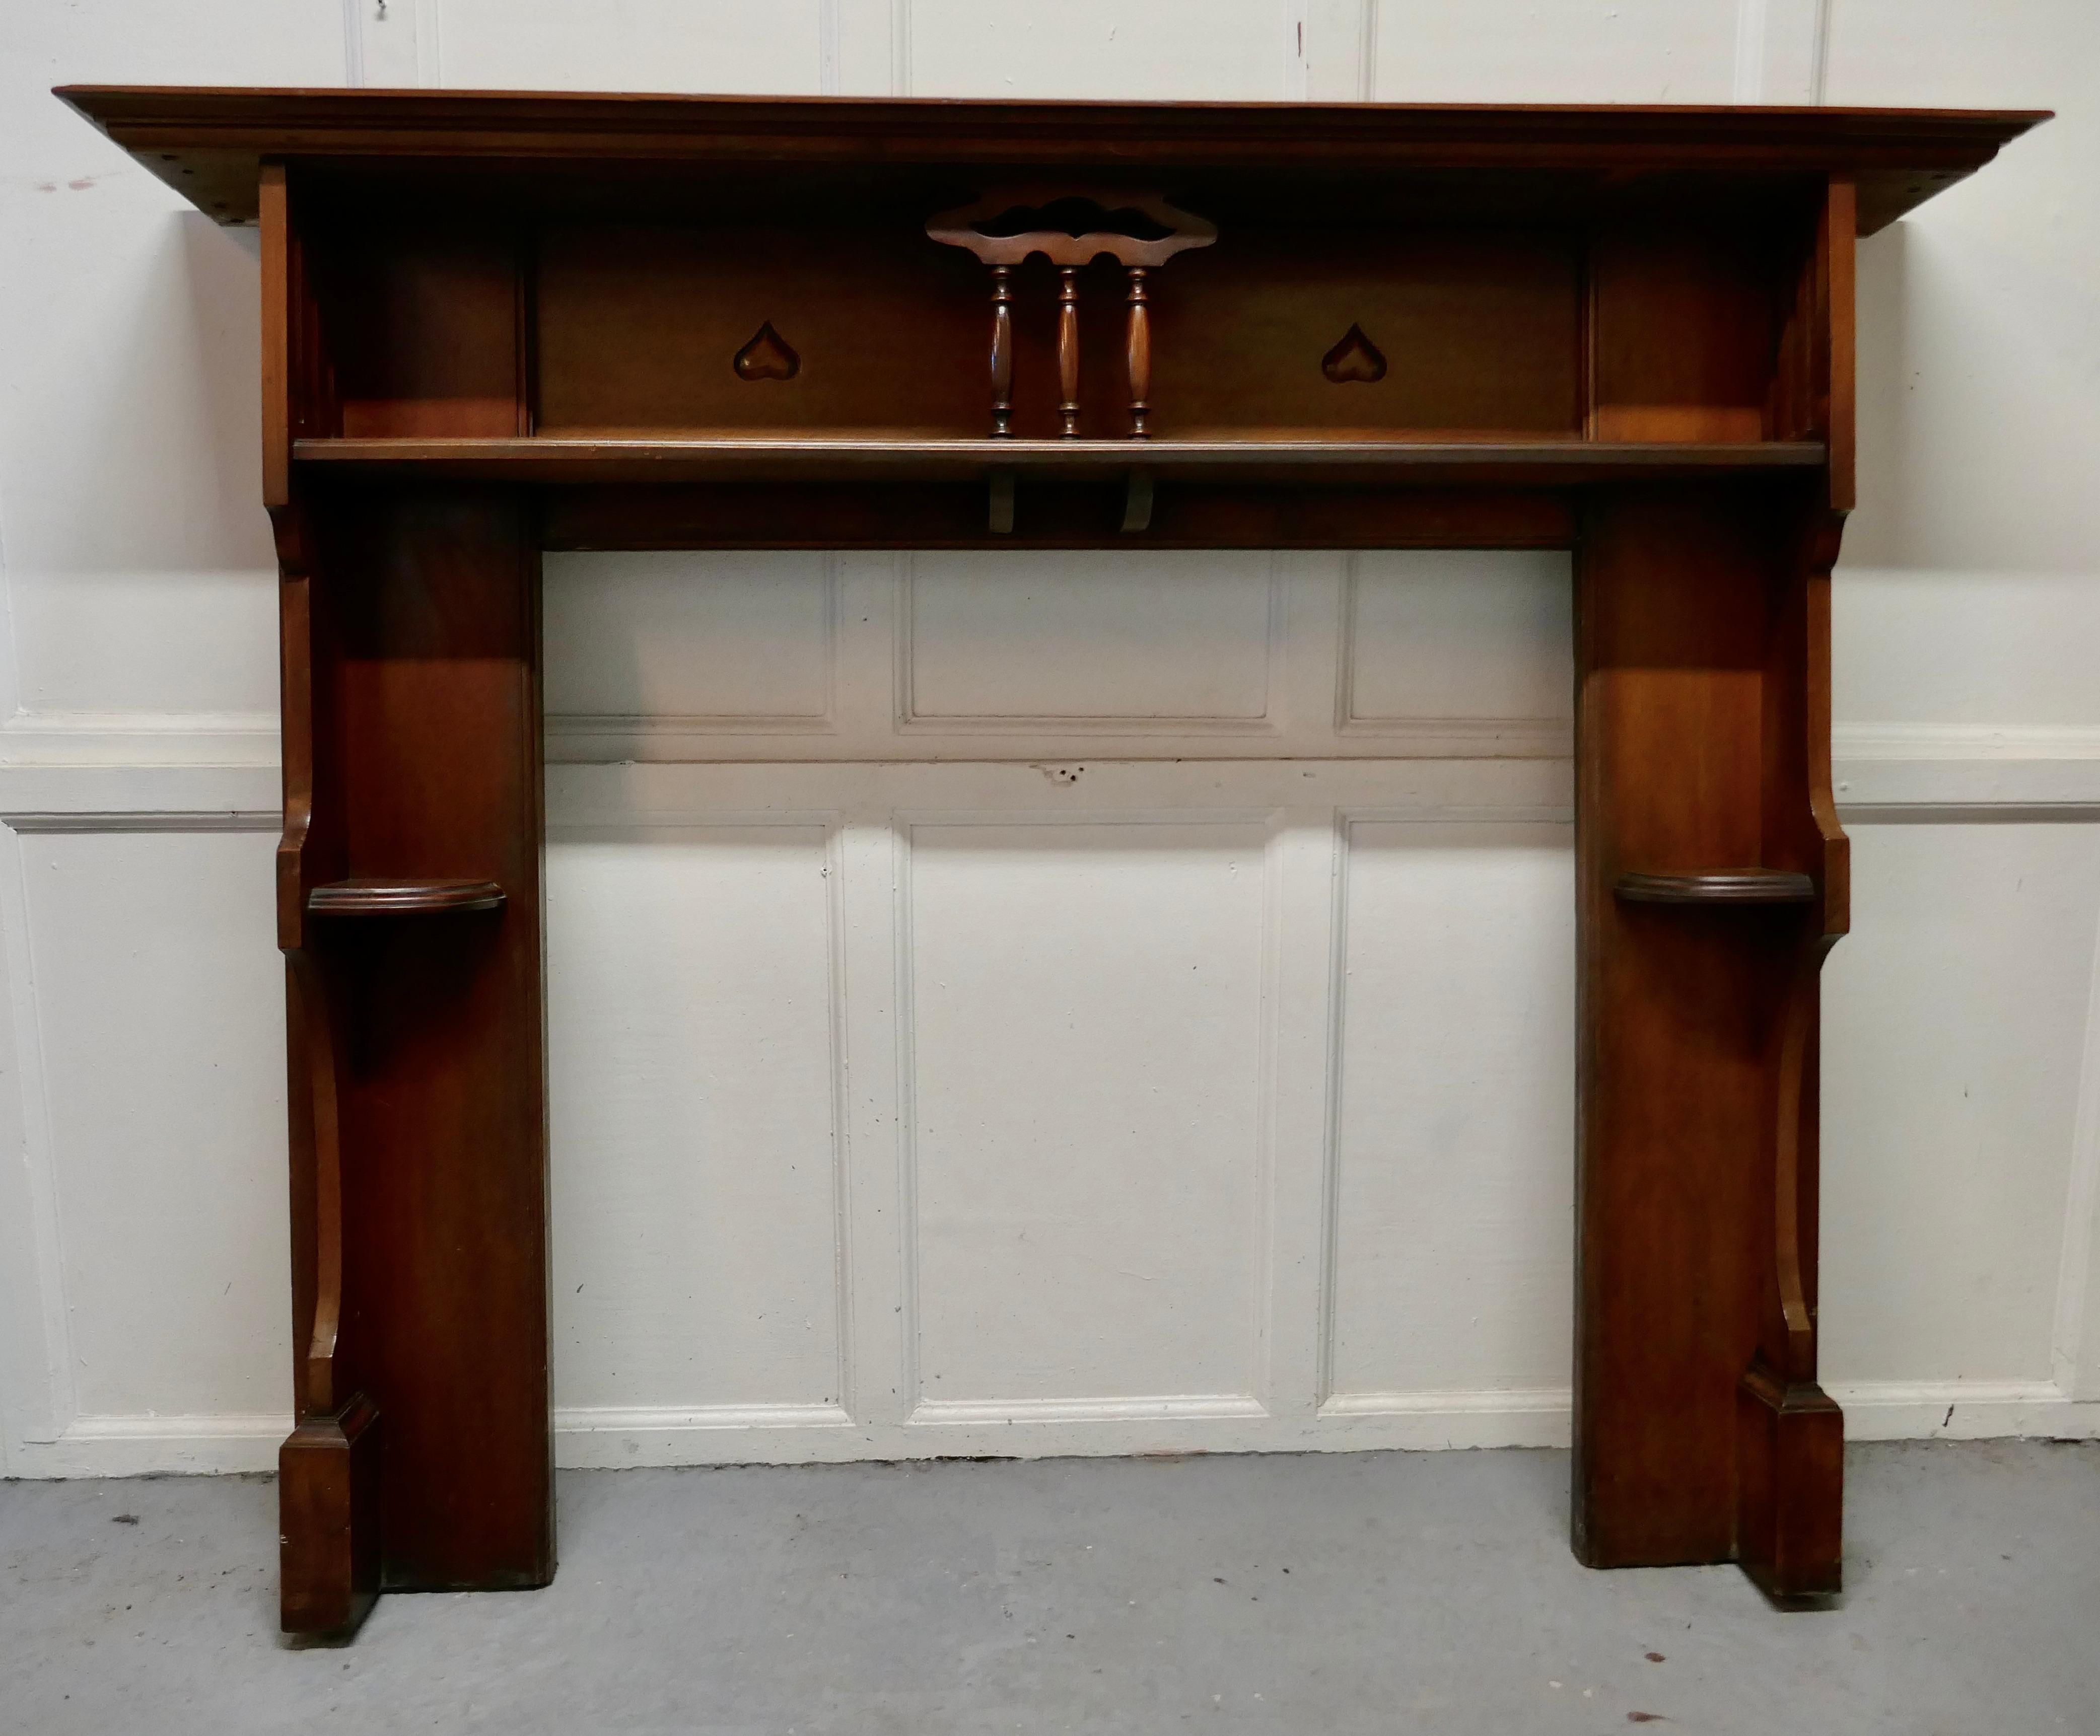 1930s Art Deco Style Mahogany Fireplace In Good Condition For Sale In Chillerton, Isle of Wight